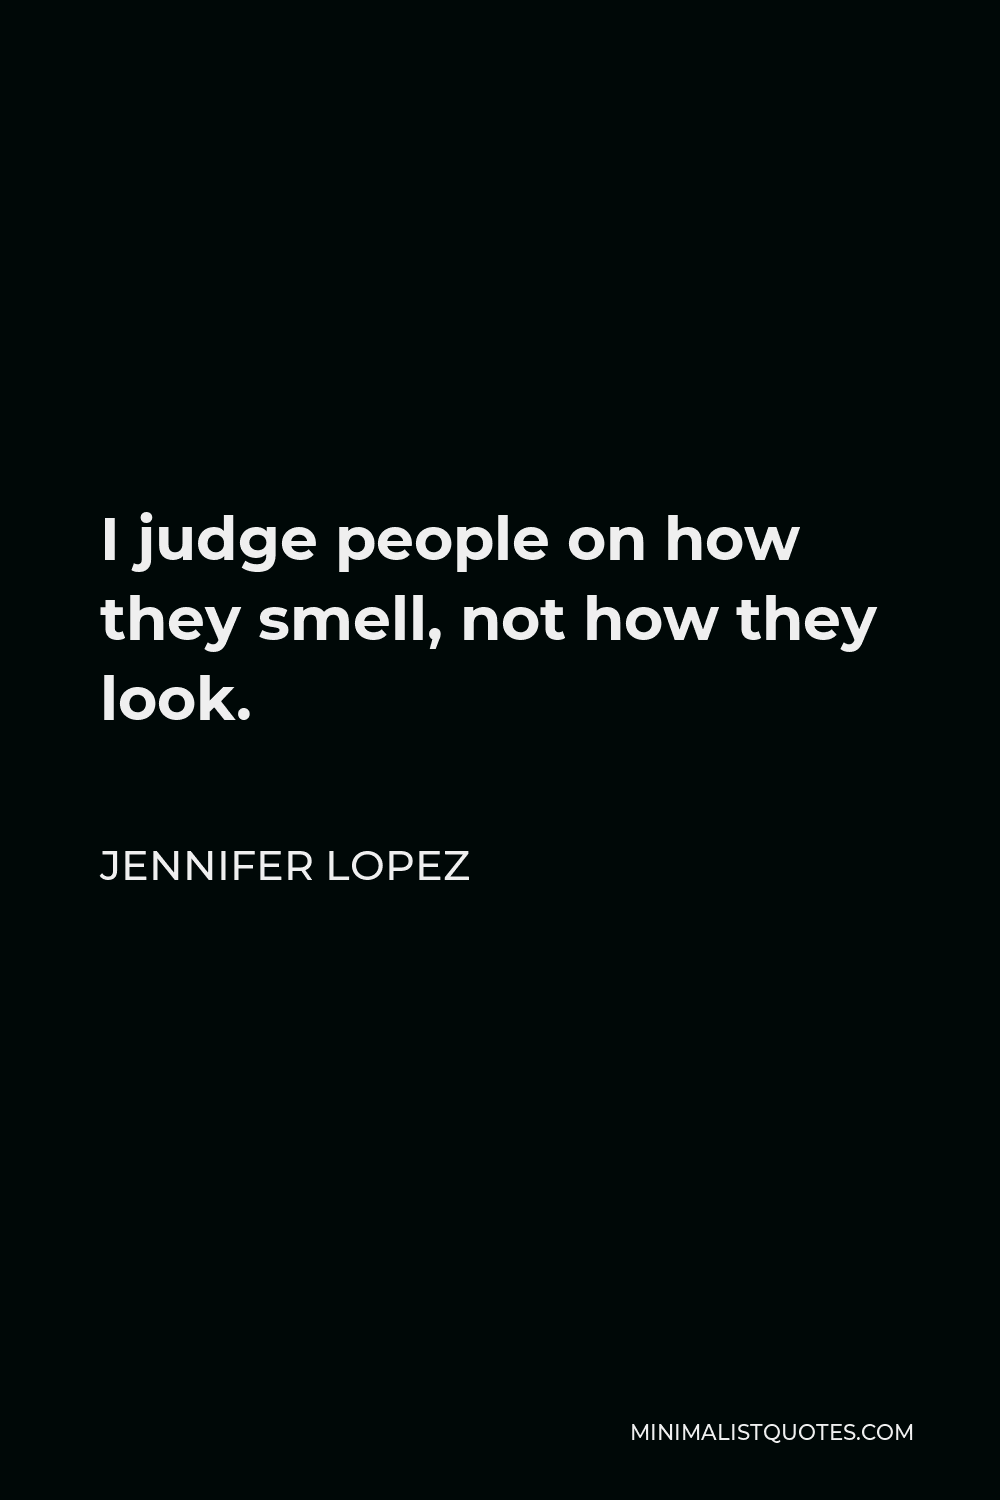 Jennifer Lopez Quote - I judge people on how they smell, not how they look.